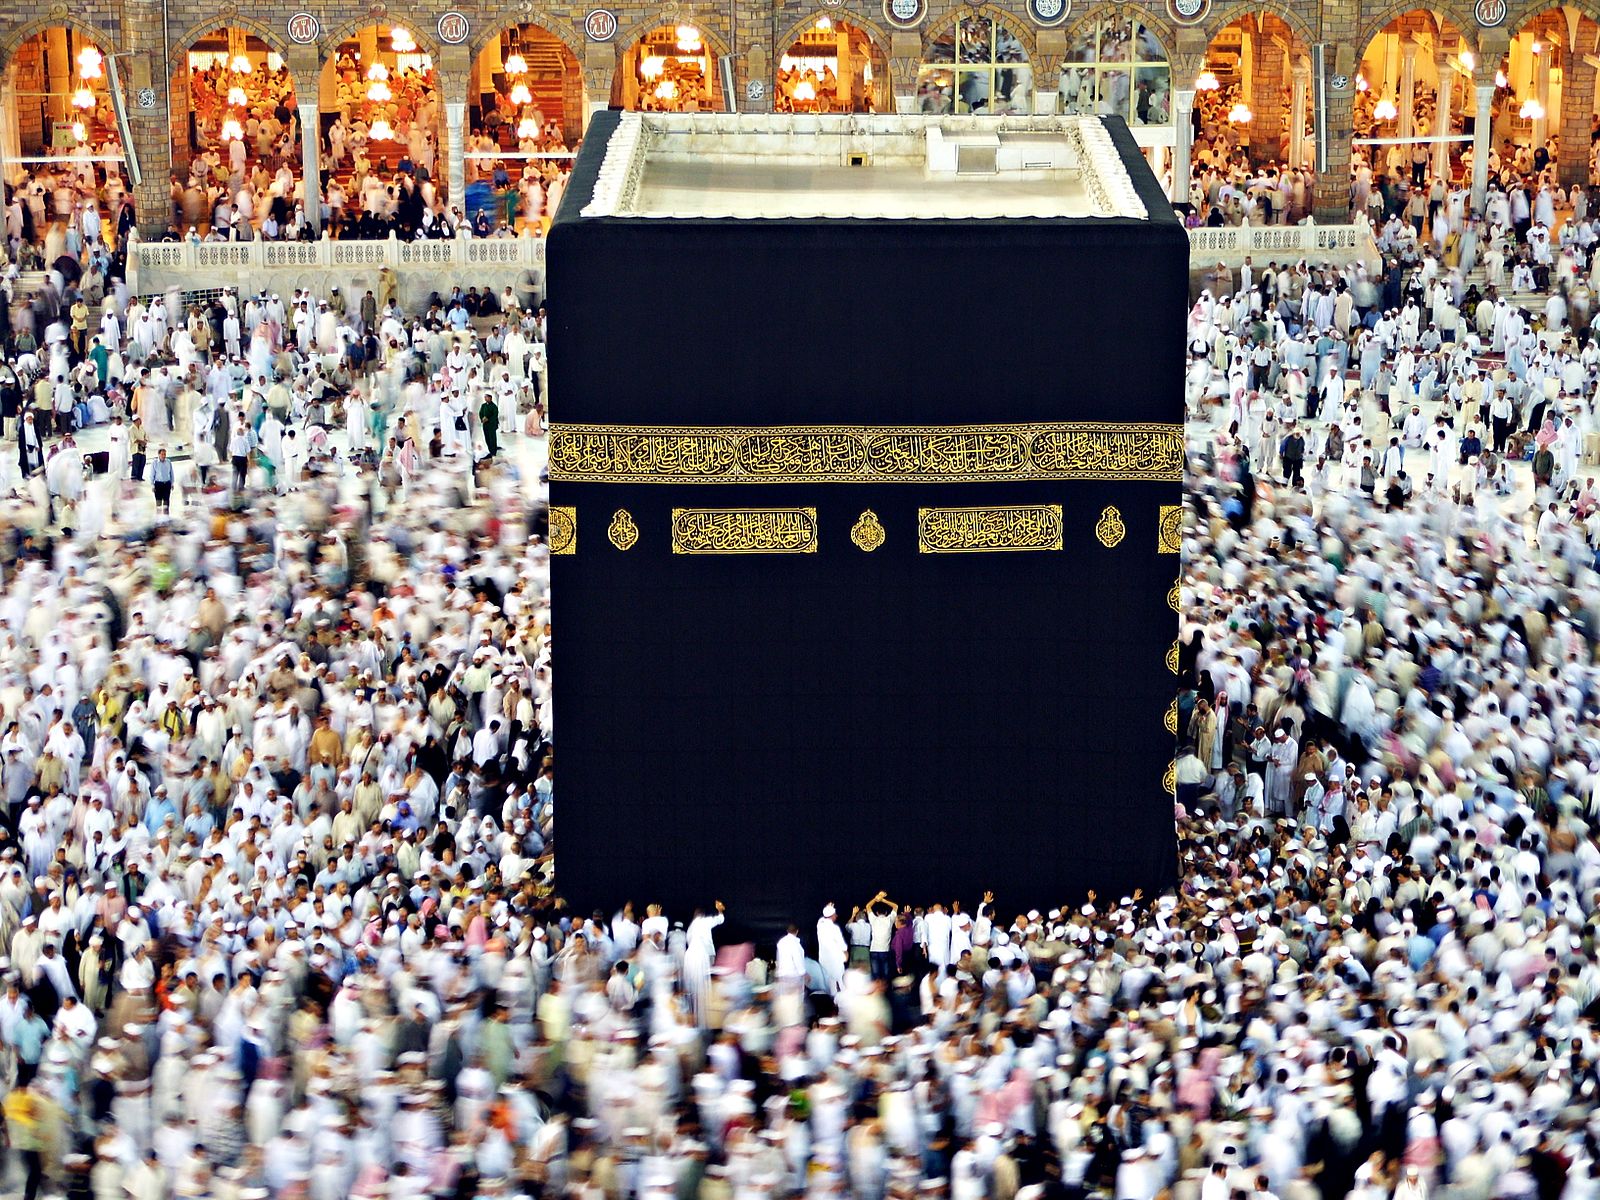 Pilgrims circle the Kaaba at the Grand Mosque.